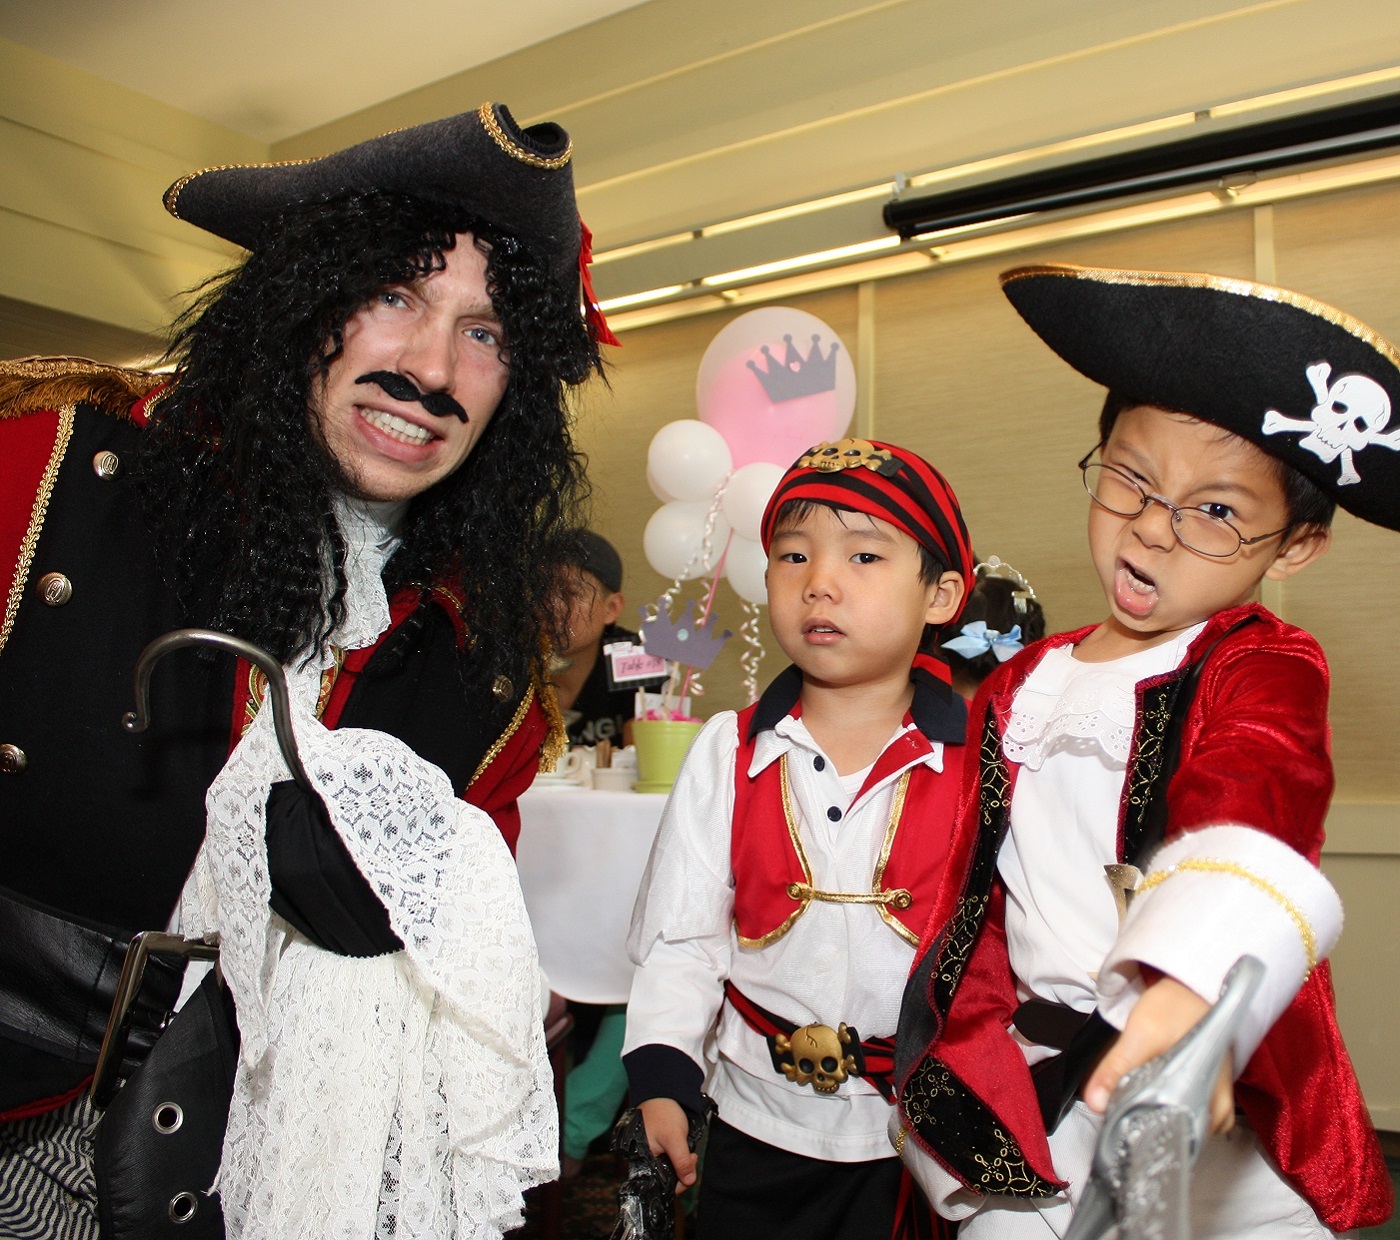 youngsters enjoy swashbuckling pirate adventures at Once Upon a Time event at Black Creek Pioneer Village